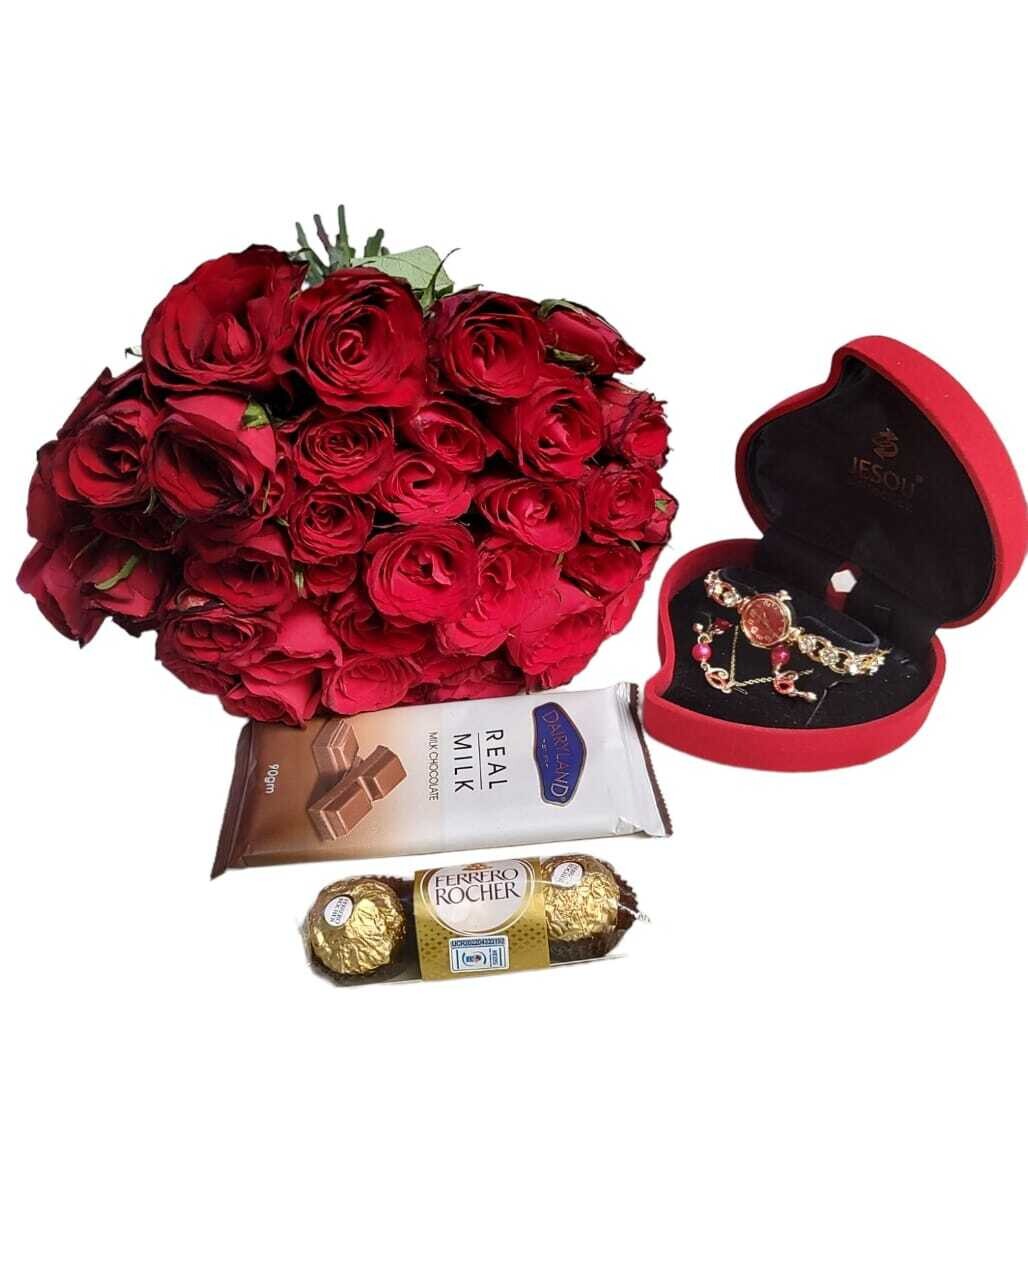 Ladies gift with flowers, chocolate & ladies giftset